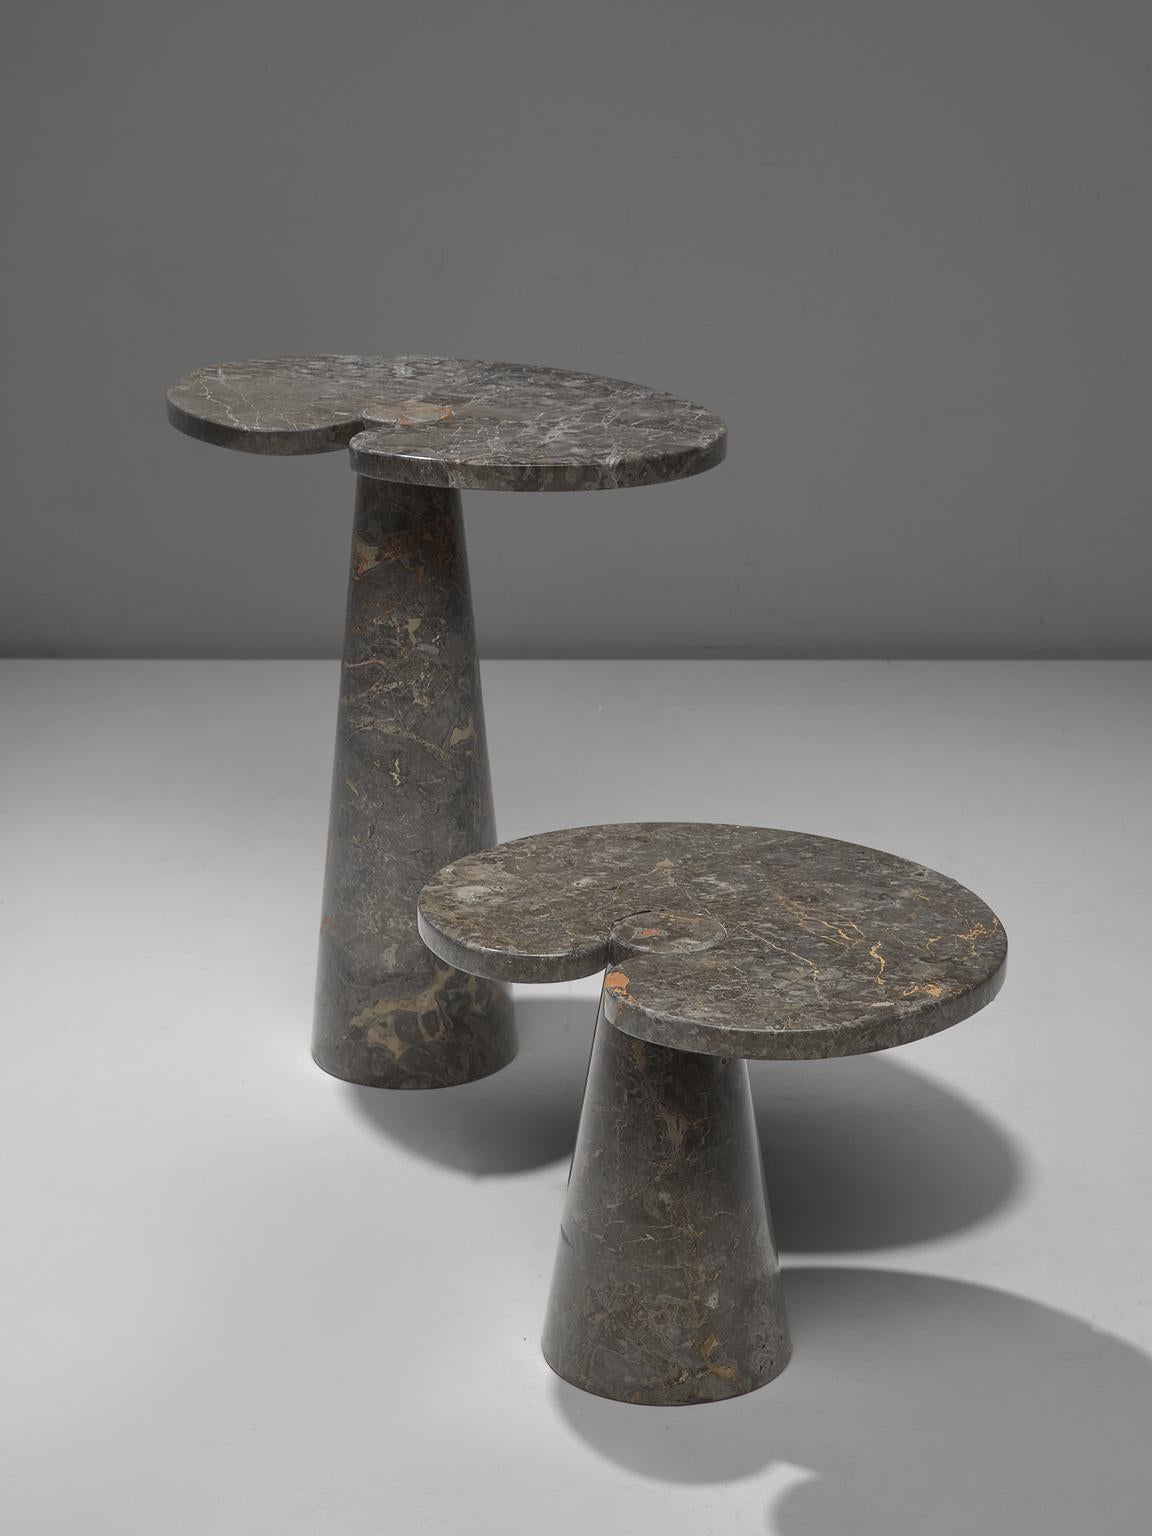 Angelo Mangiarotti, cocktail tables in grey marble, Italy, 1970s. 

These sculptural tables by Angelo Mangiarotti are a skillful example of postmodern design. The lotus leaf like side table features no joints or clamps and is architectural in its